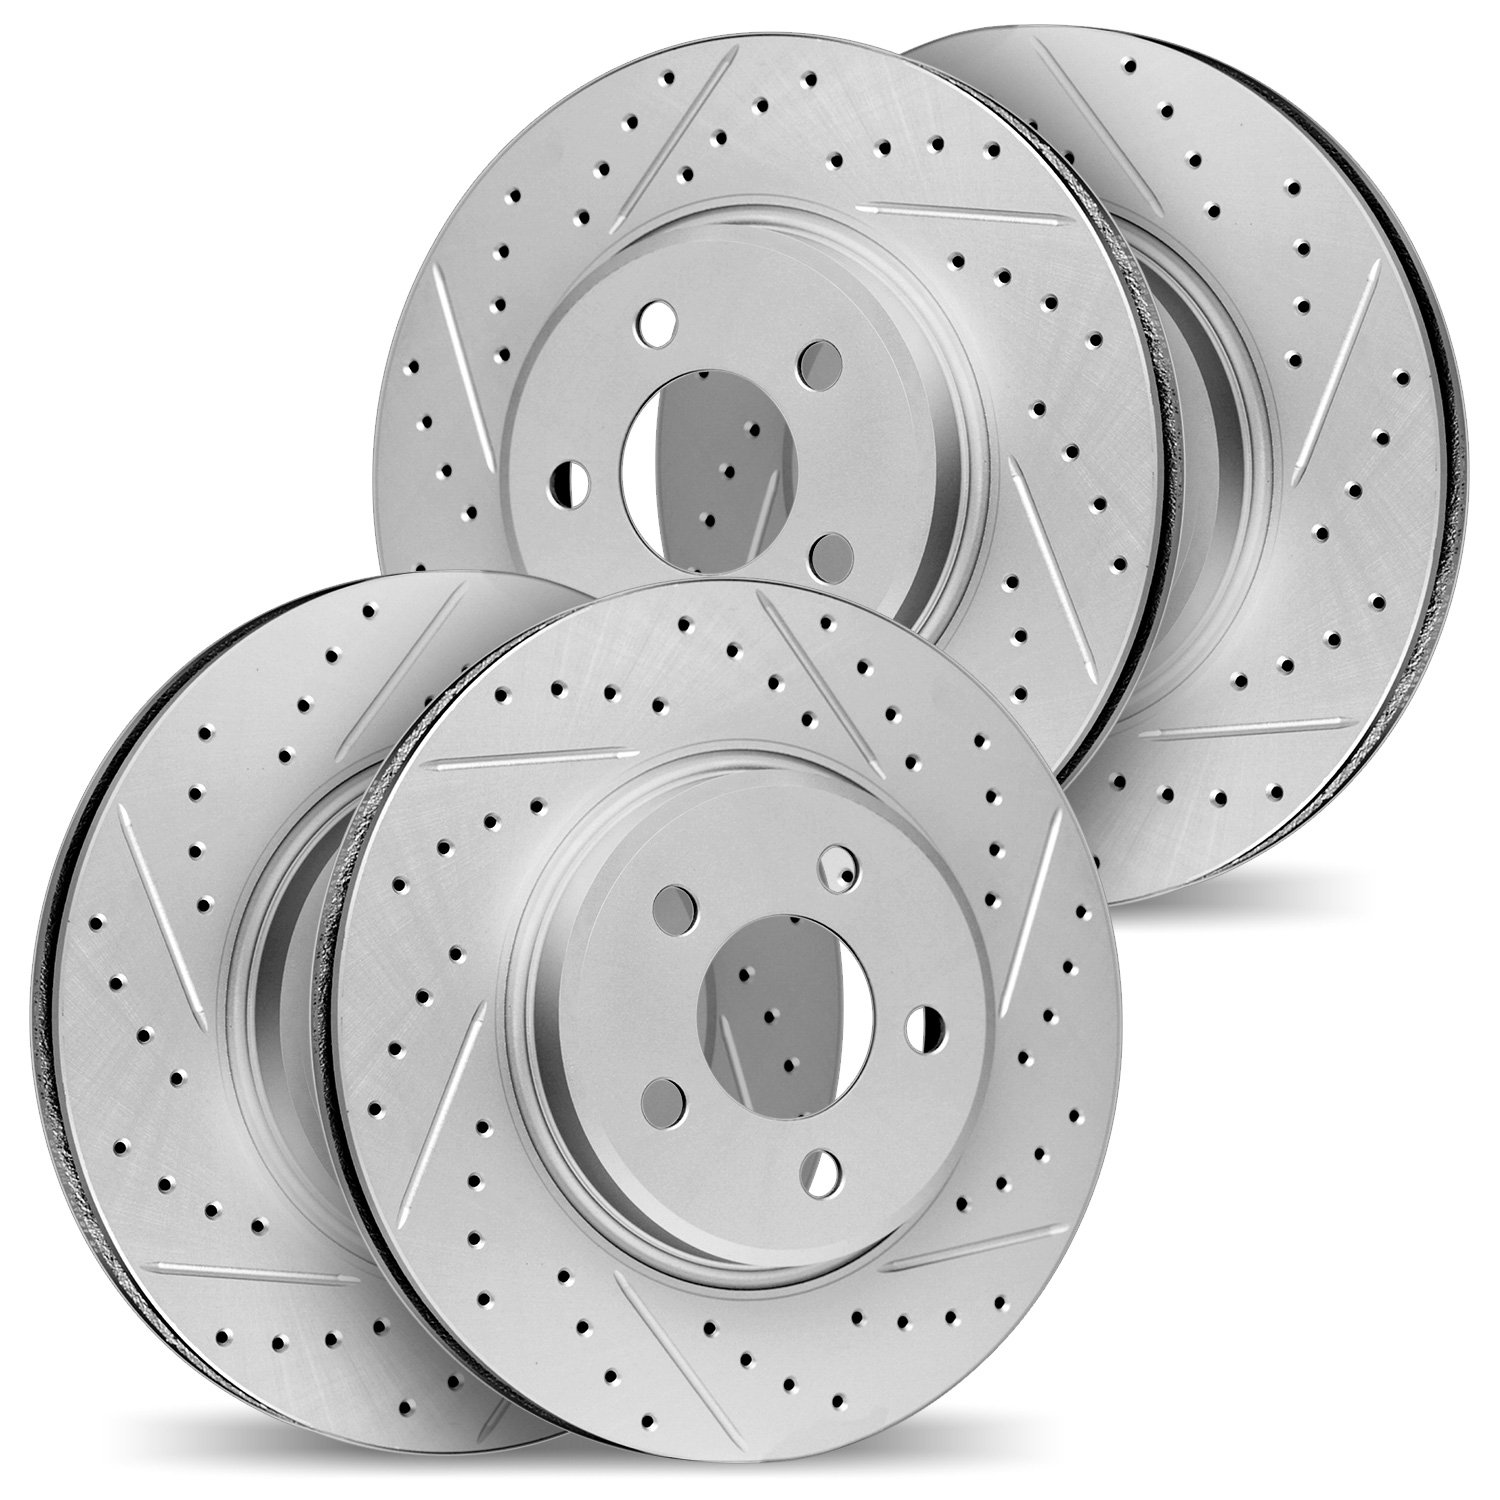 2004-13024 Geoperformance Drilled/Slotted Brake Rotors, 2006-2007 Subaru, Position: Front and Rear